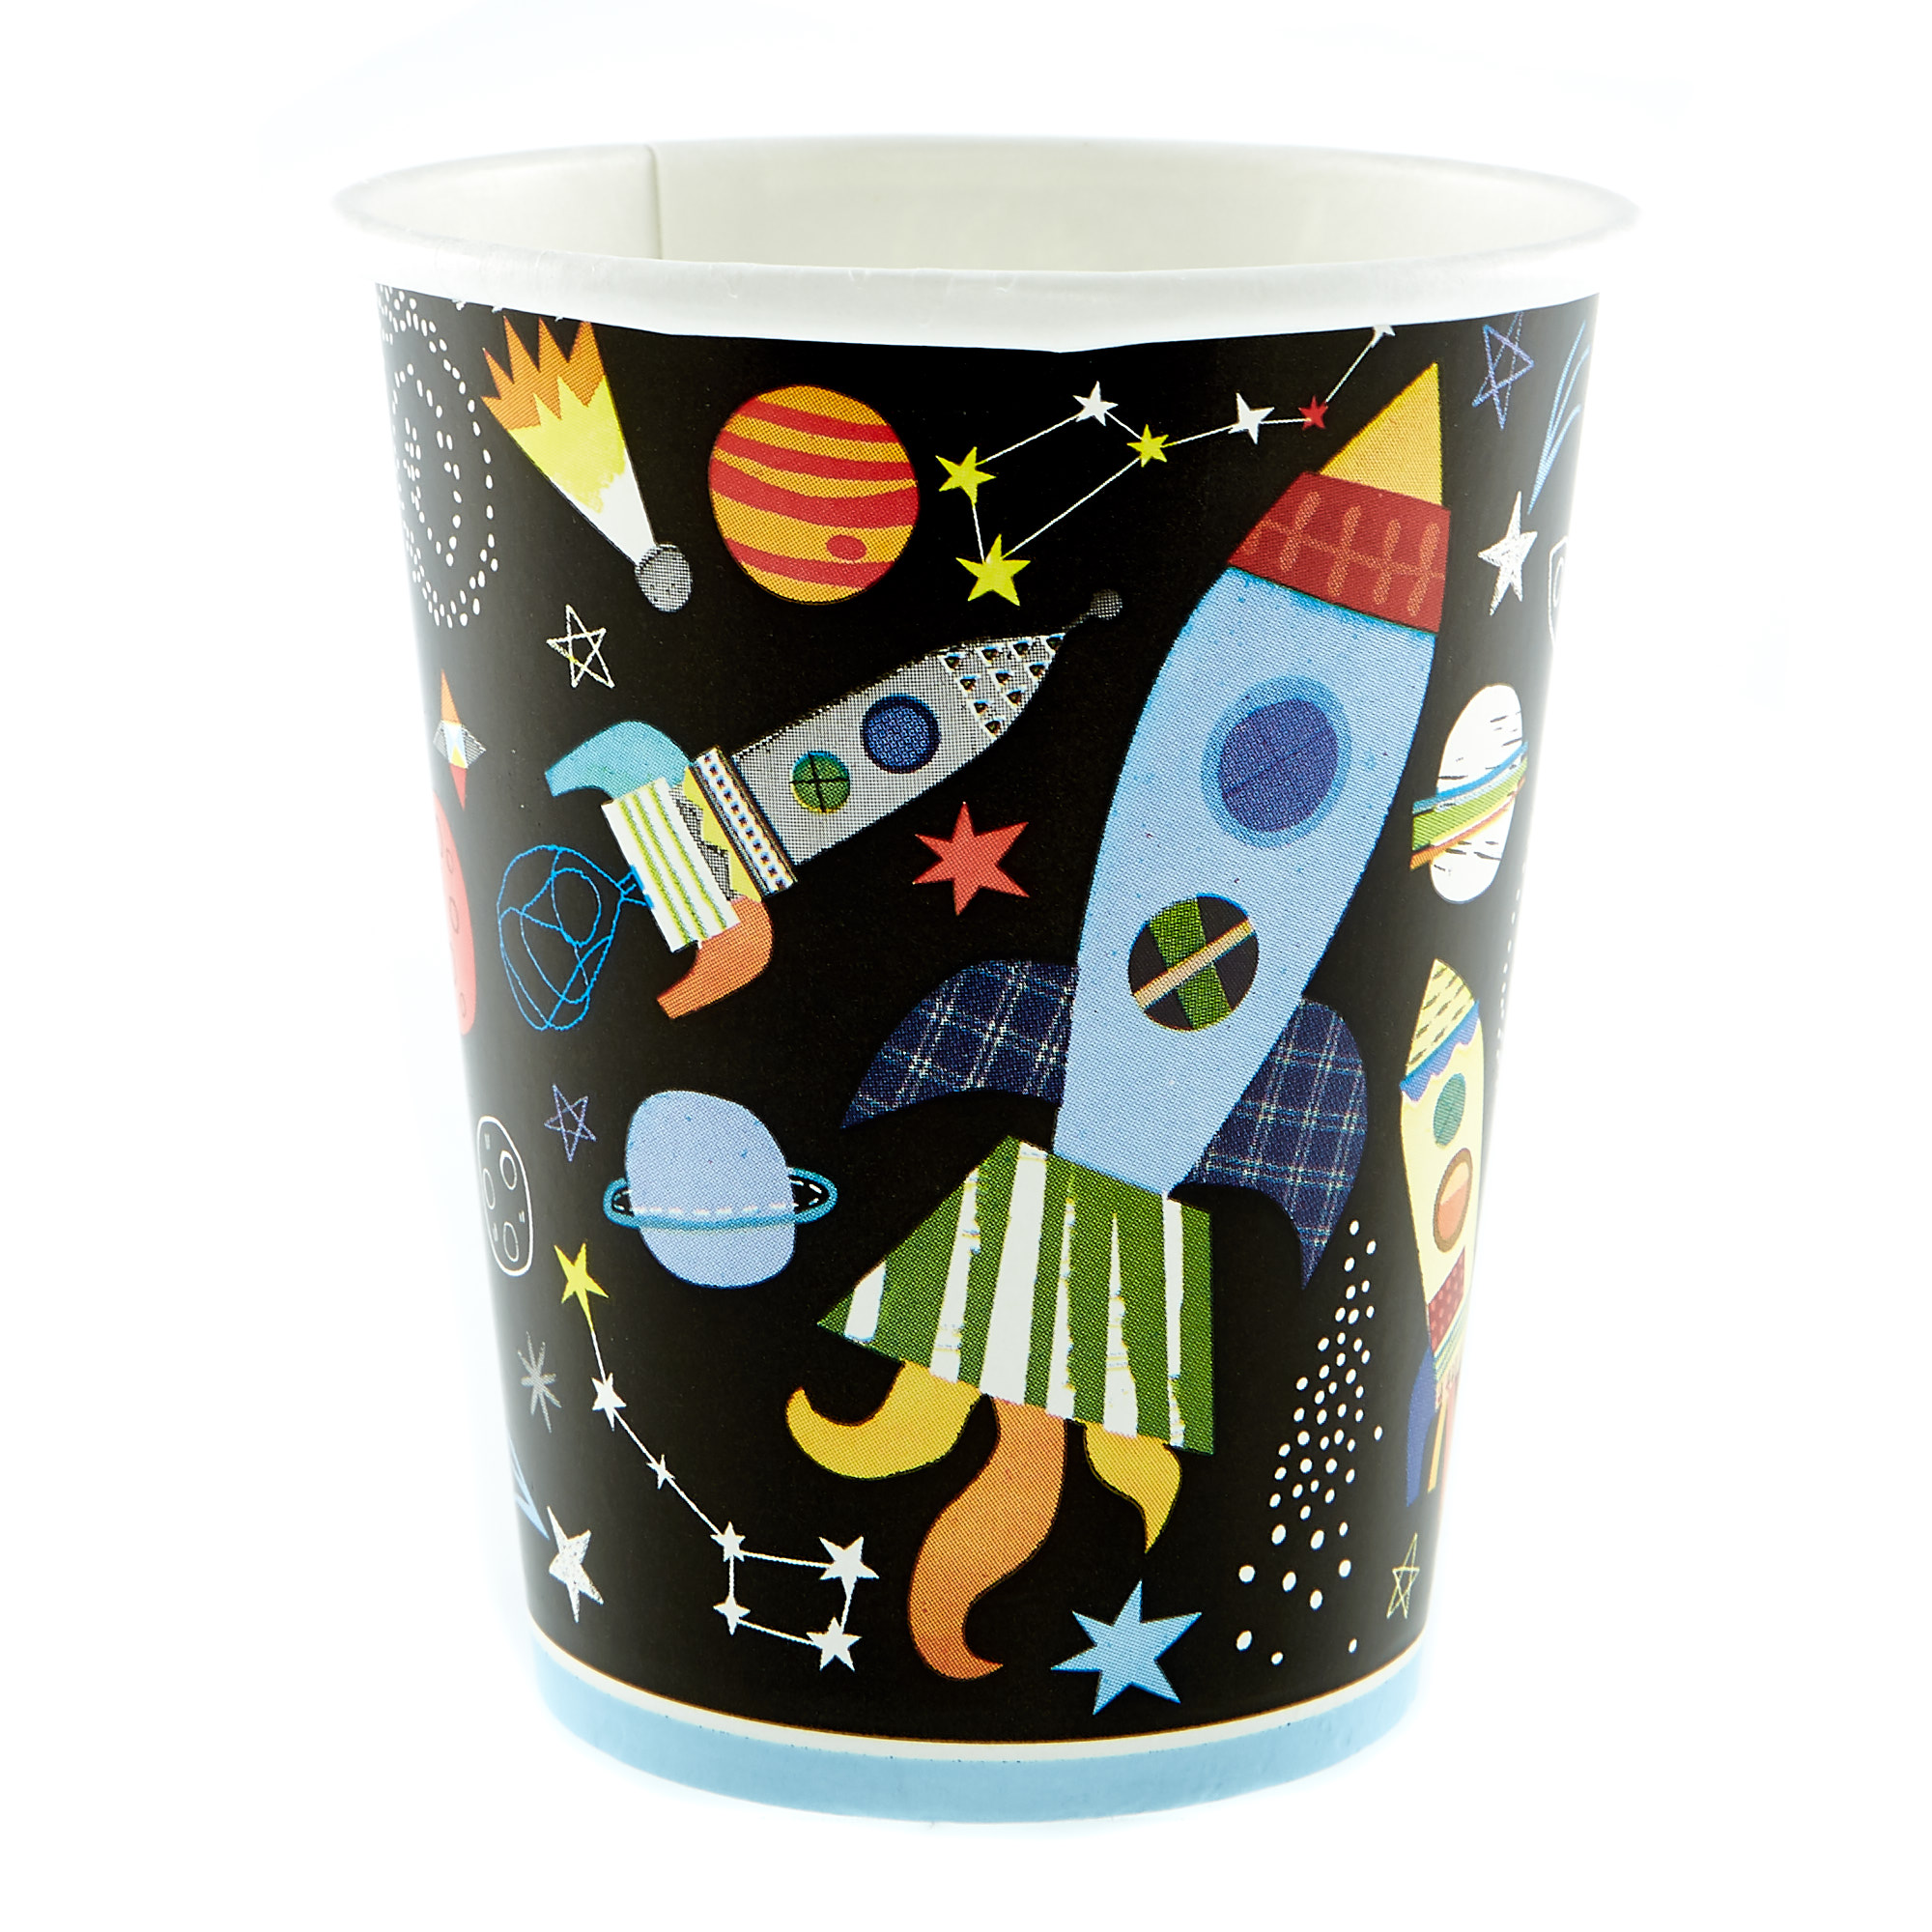 Space Birthday Party Tableware & Decorations Bundle - 16 Guests